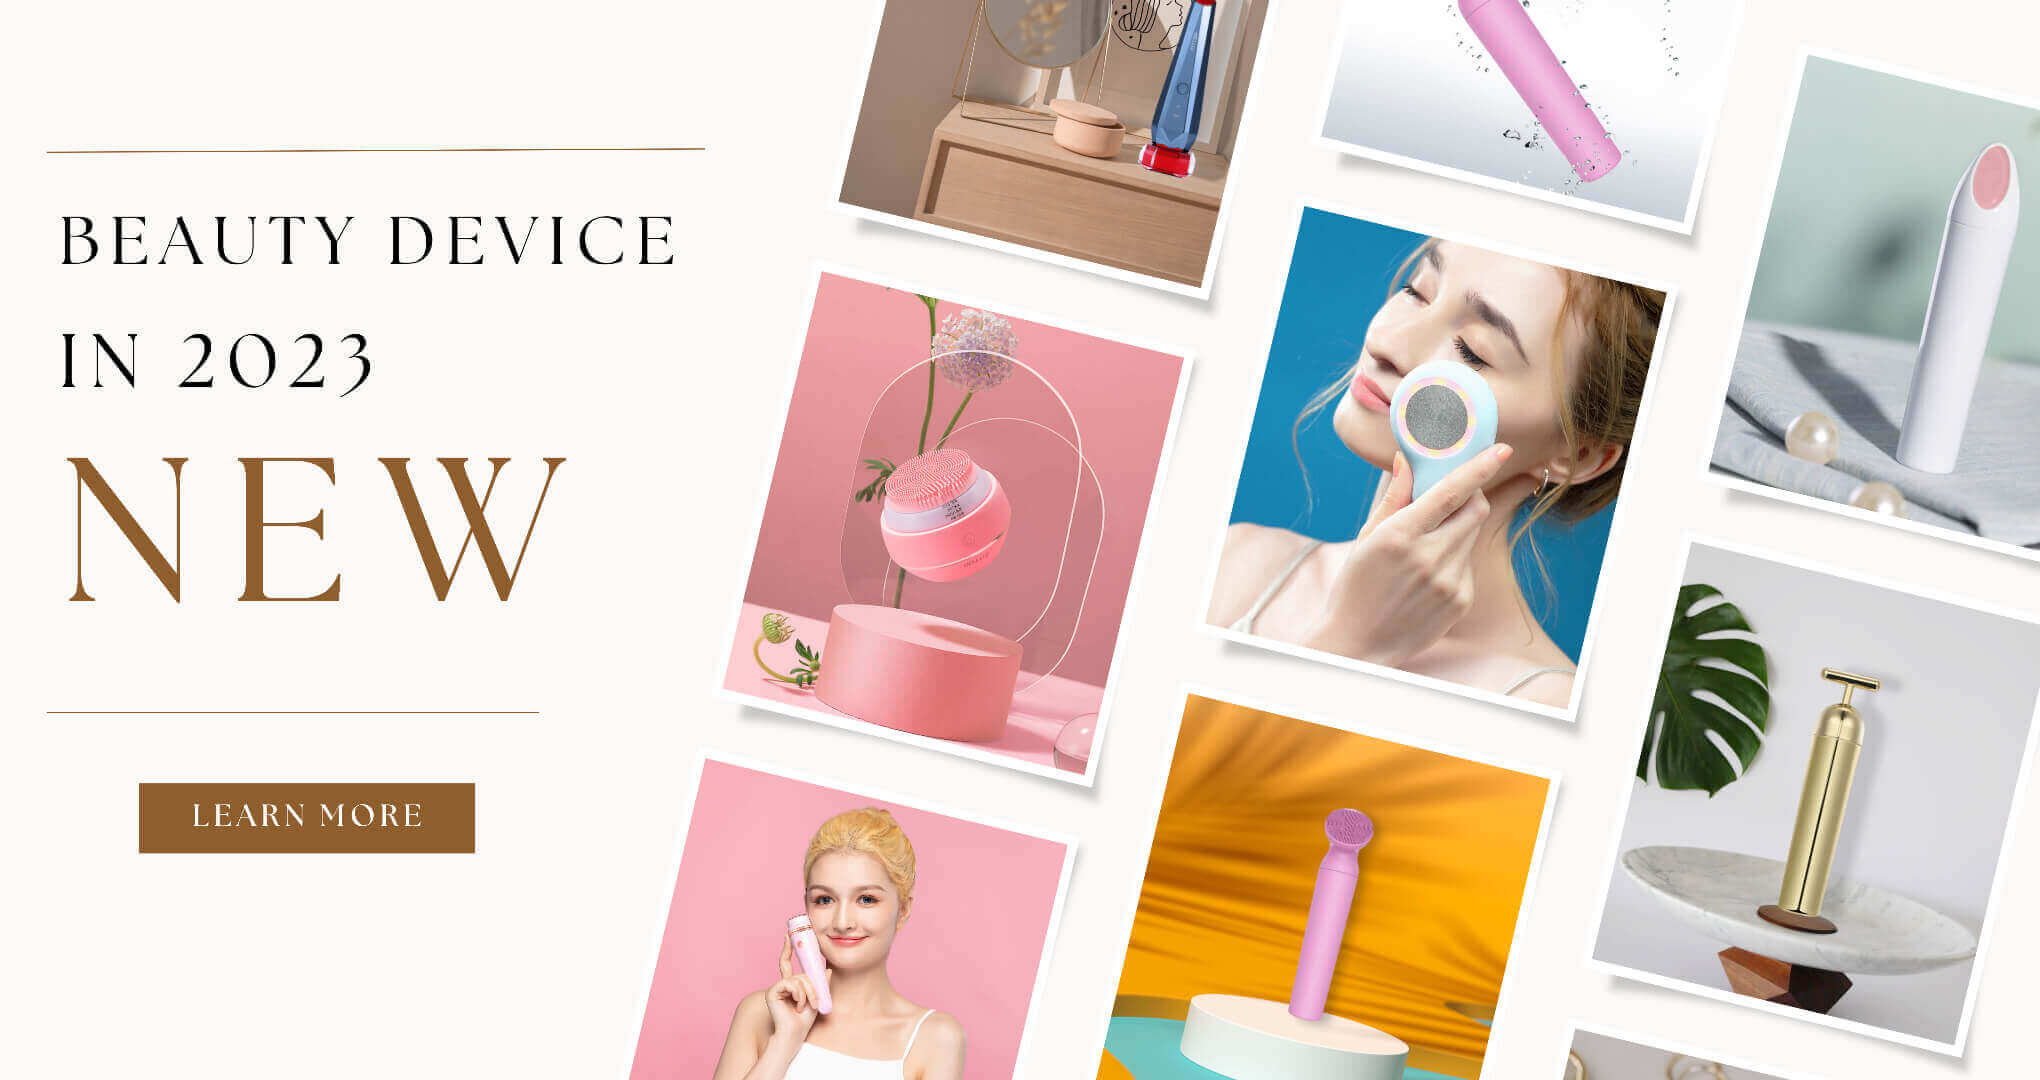 What do we need to consider when we develop a new beauty device?